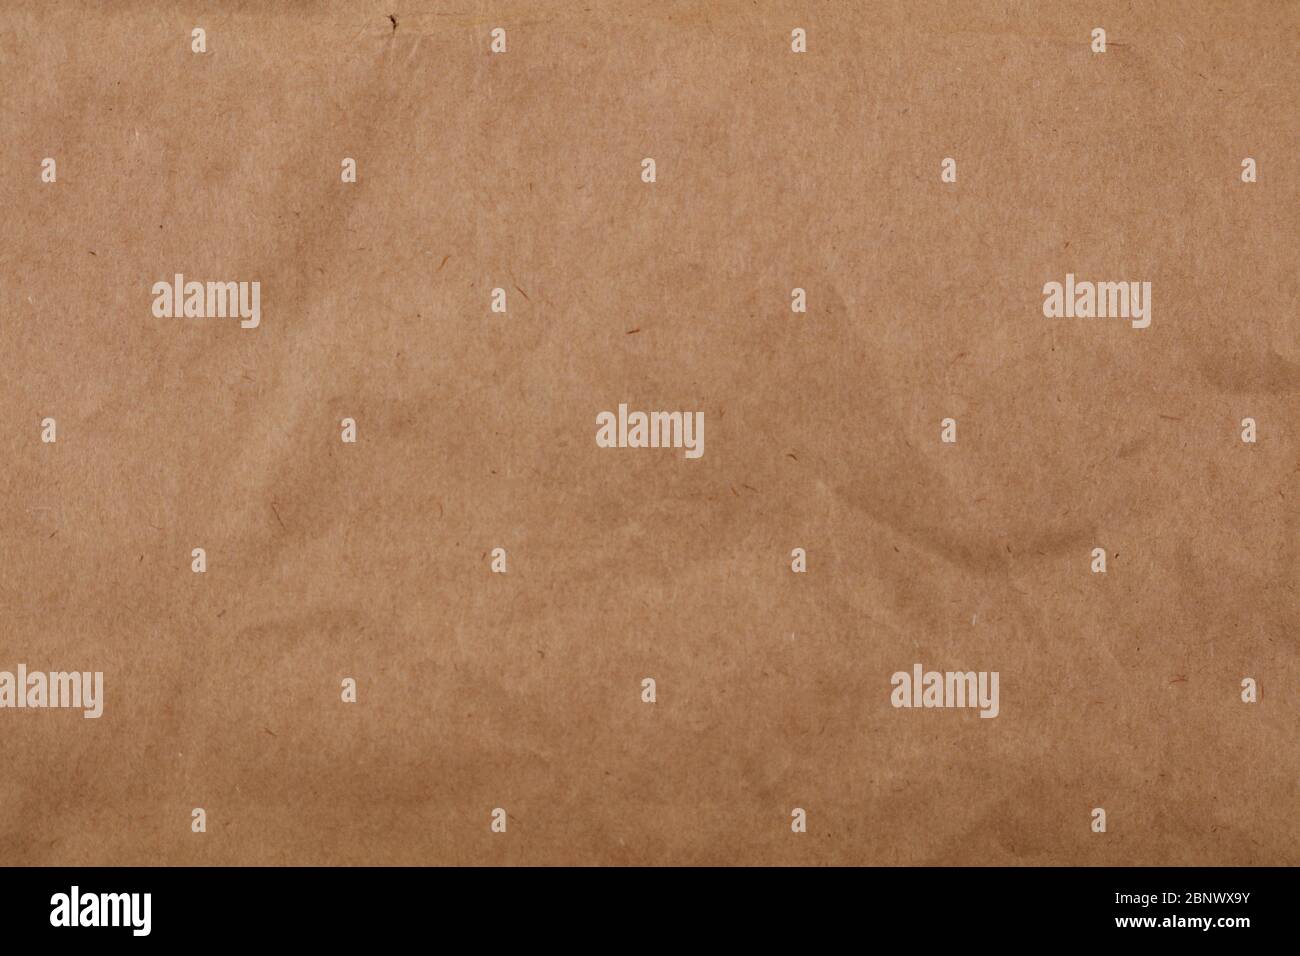 Closeup of brown paper texture background Stock Photo